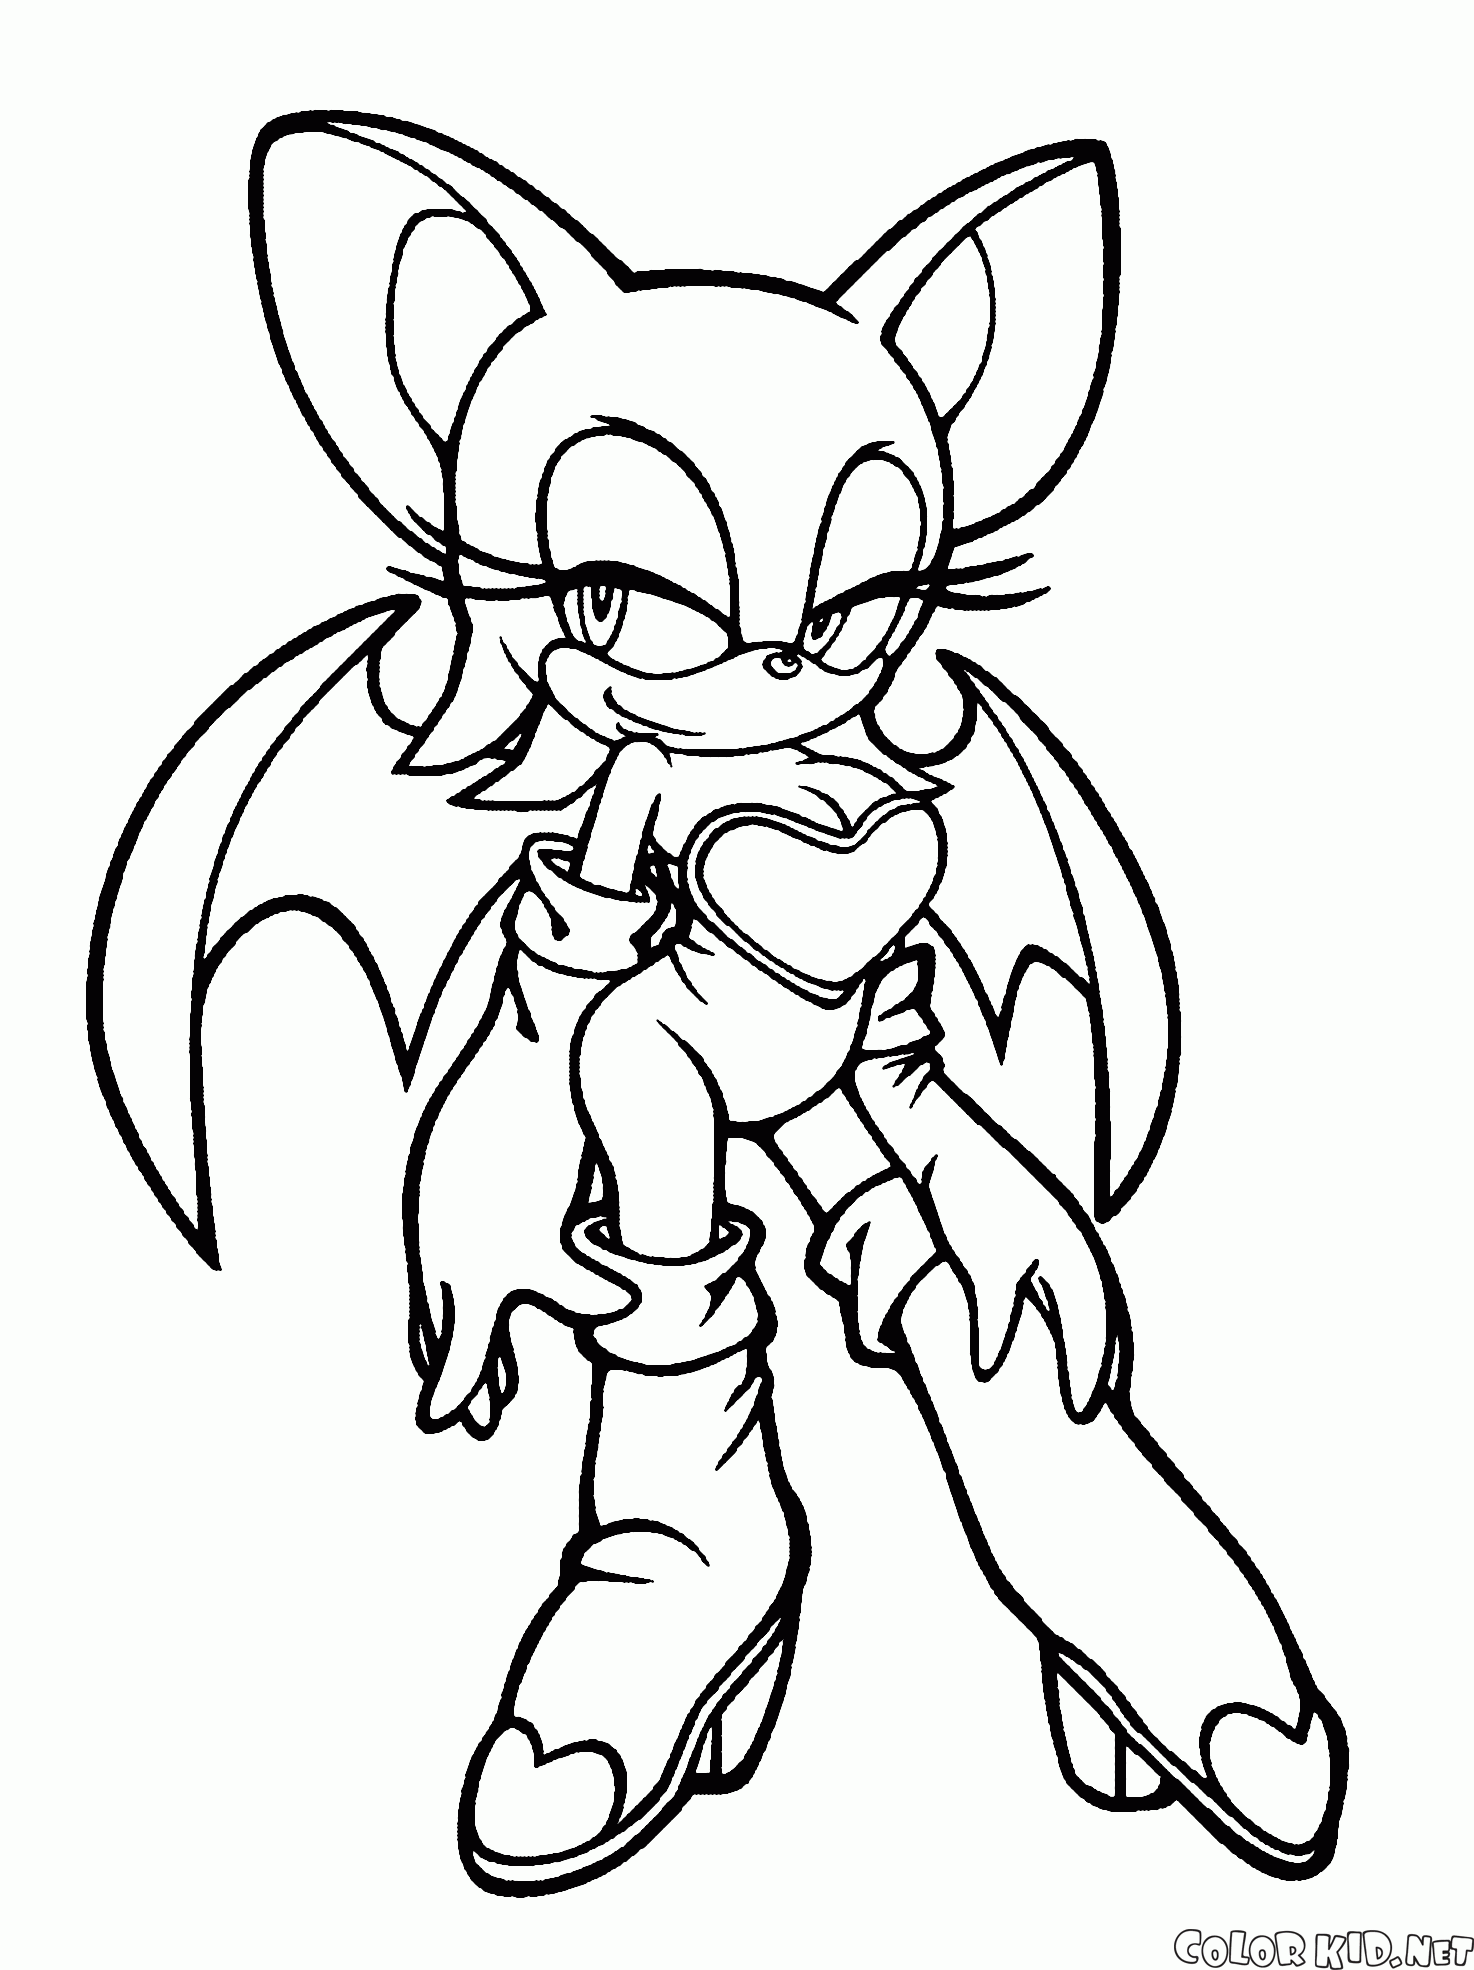 Coloring page - Sonic X